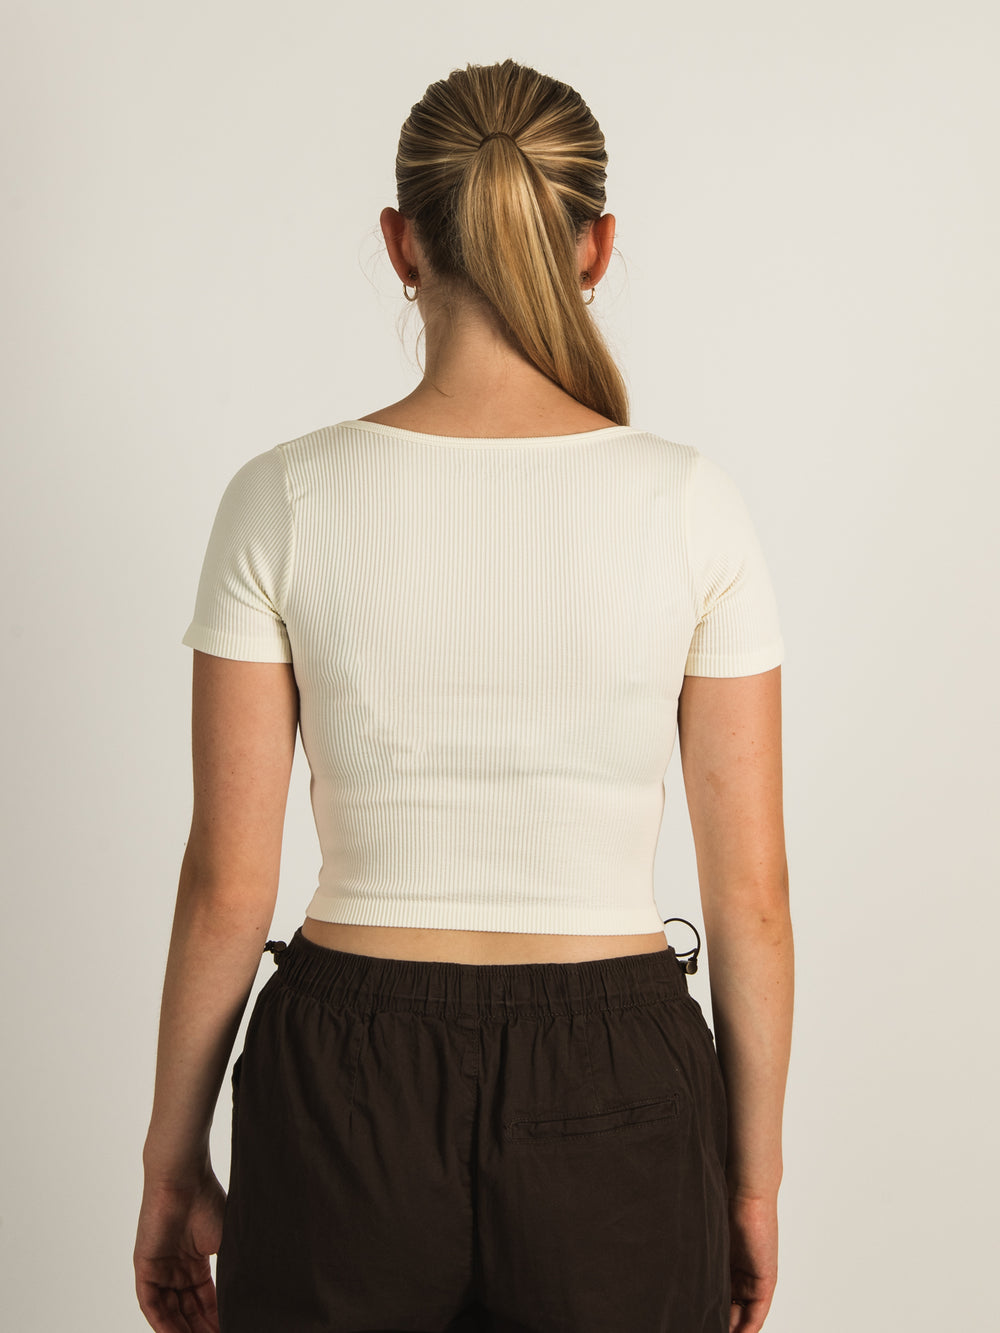 HARLOW SQUARE NECK SEAMLESS T-SHIRT